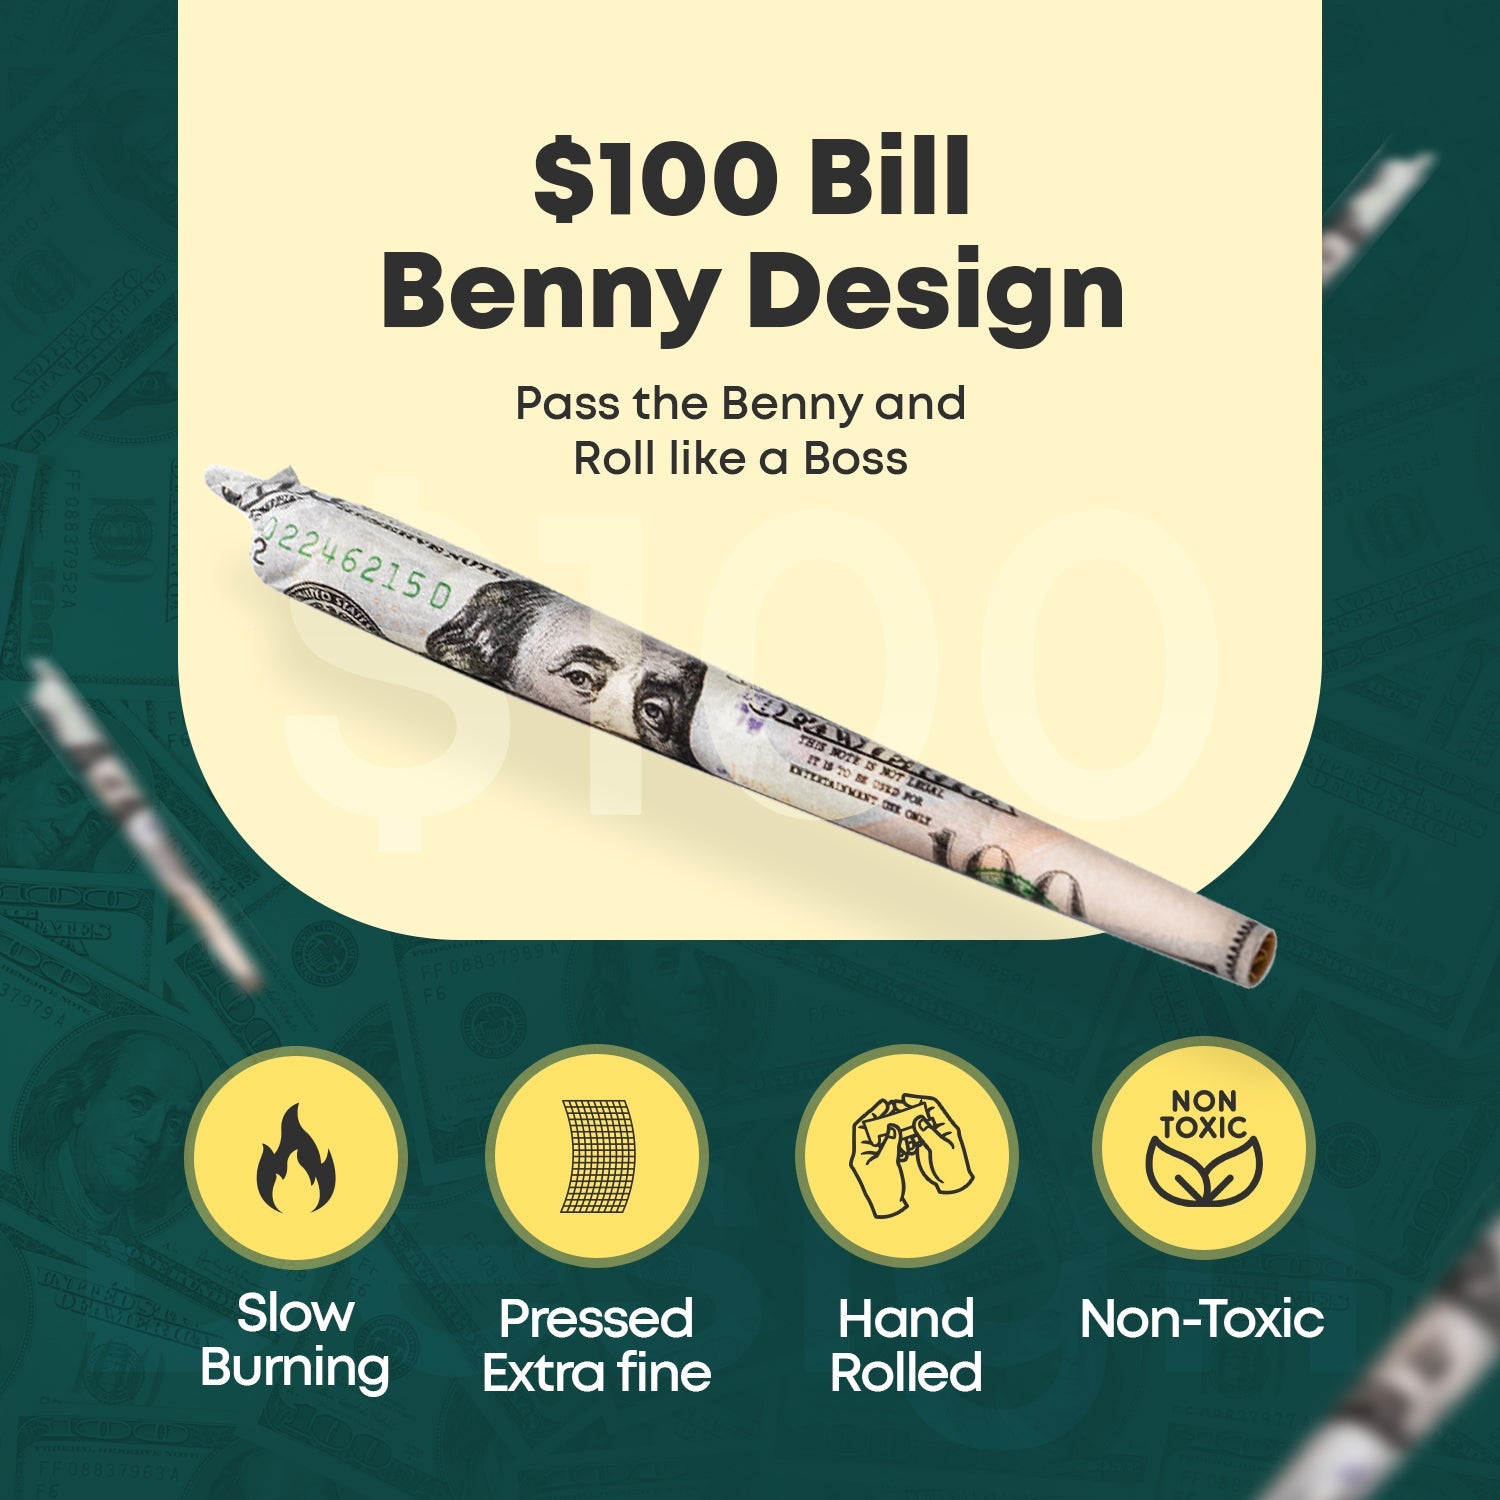 Empire Rolling's King Size Organic Hemp Rolling Papers, eco-friendly and crafted with high-quality, natural materials for a premium smoking experience.BENNY LITE Papers - Empire Rolling Papers